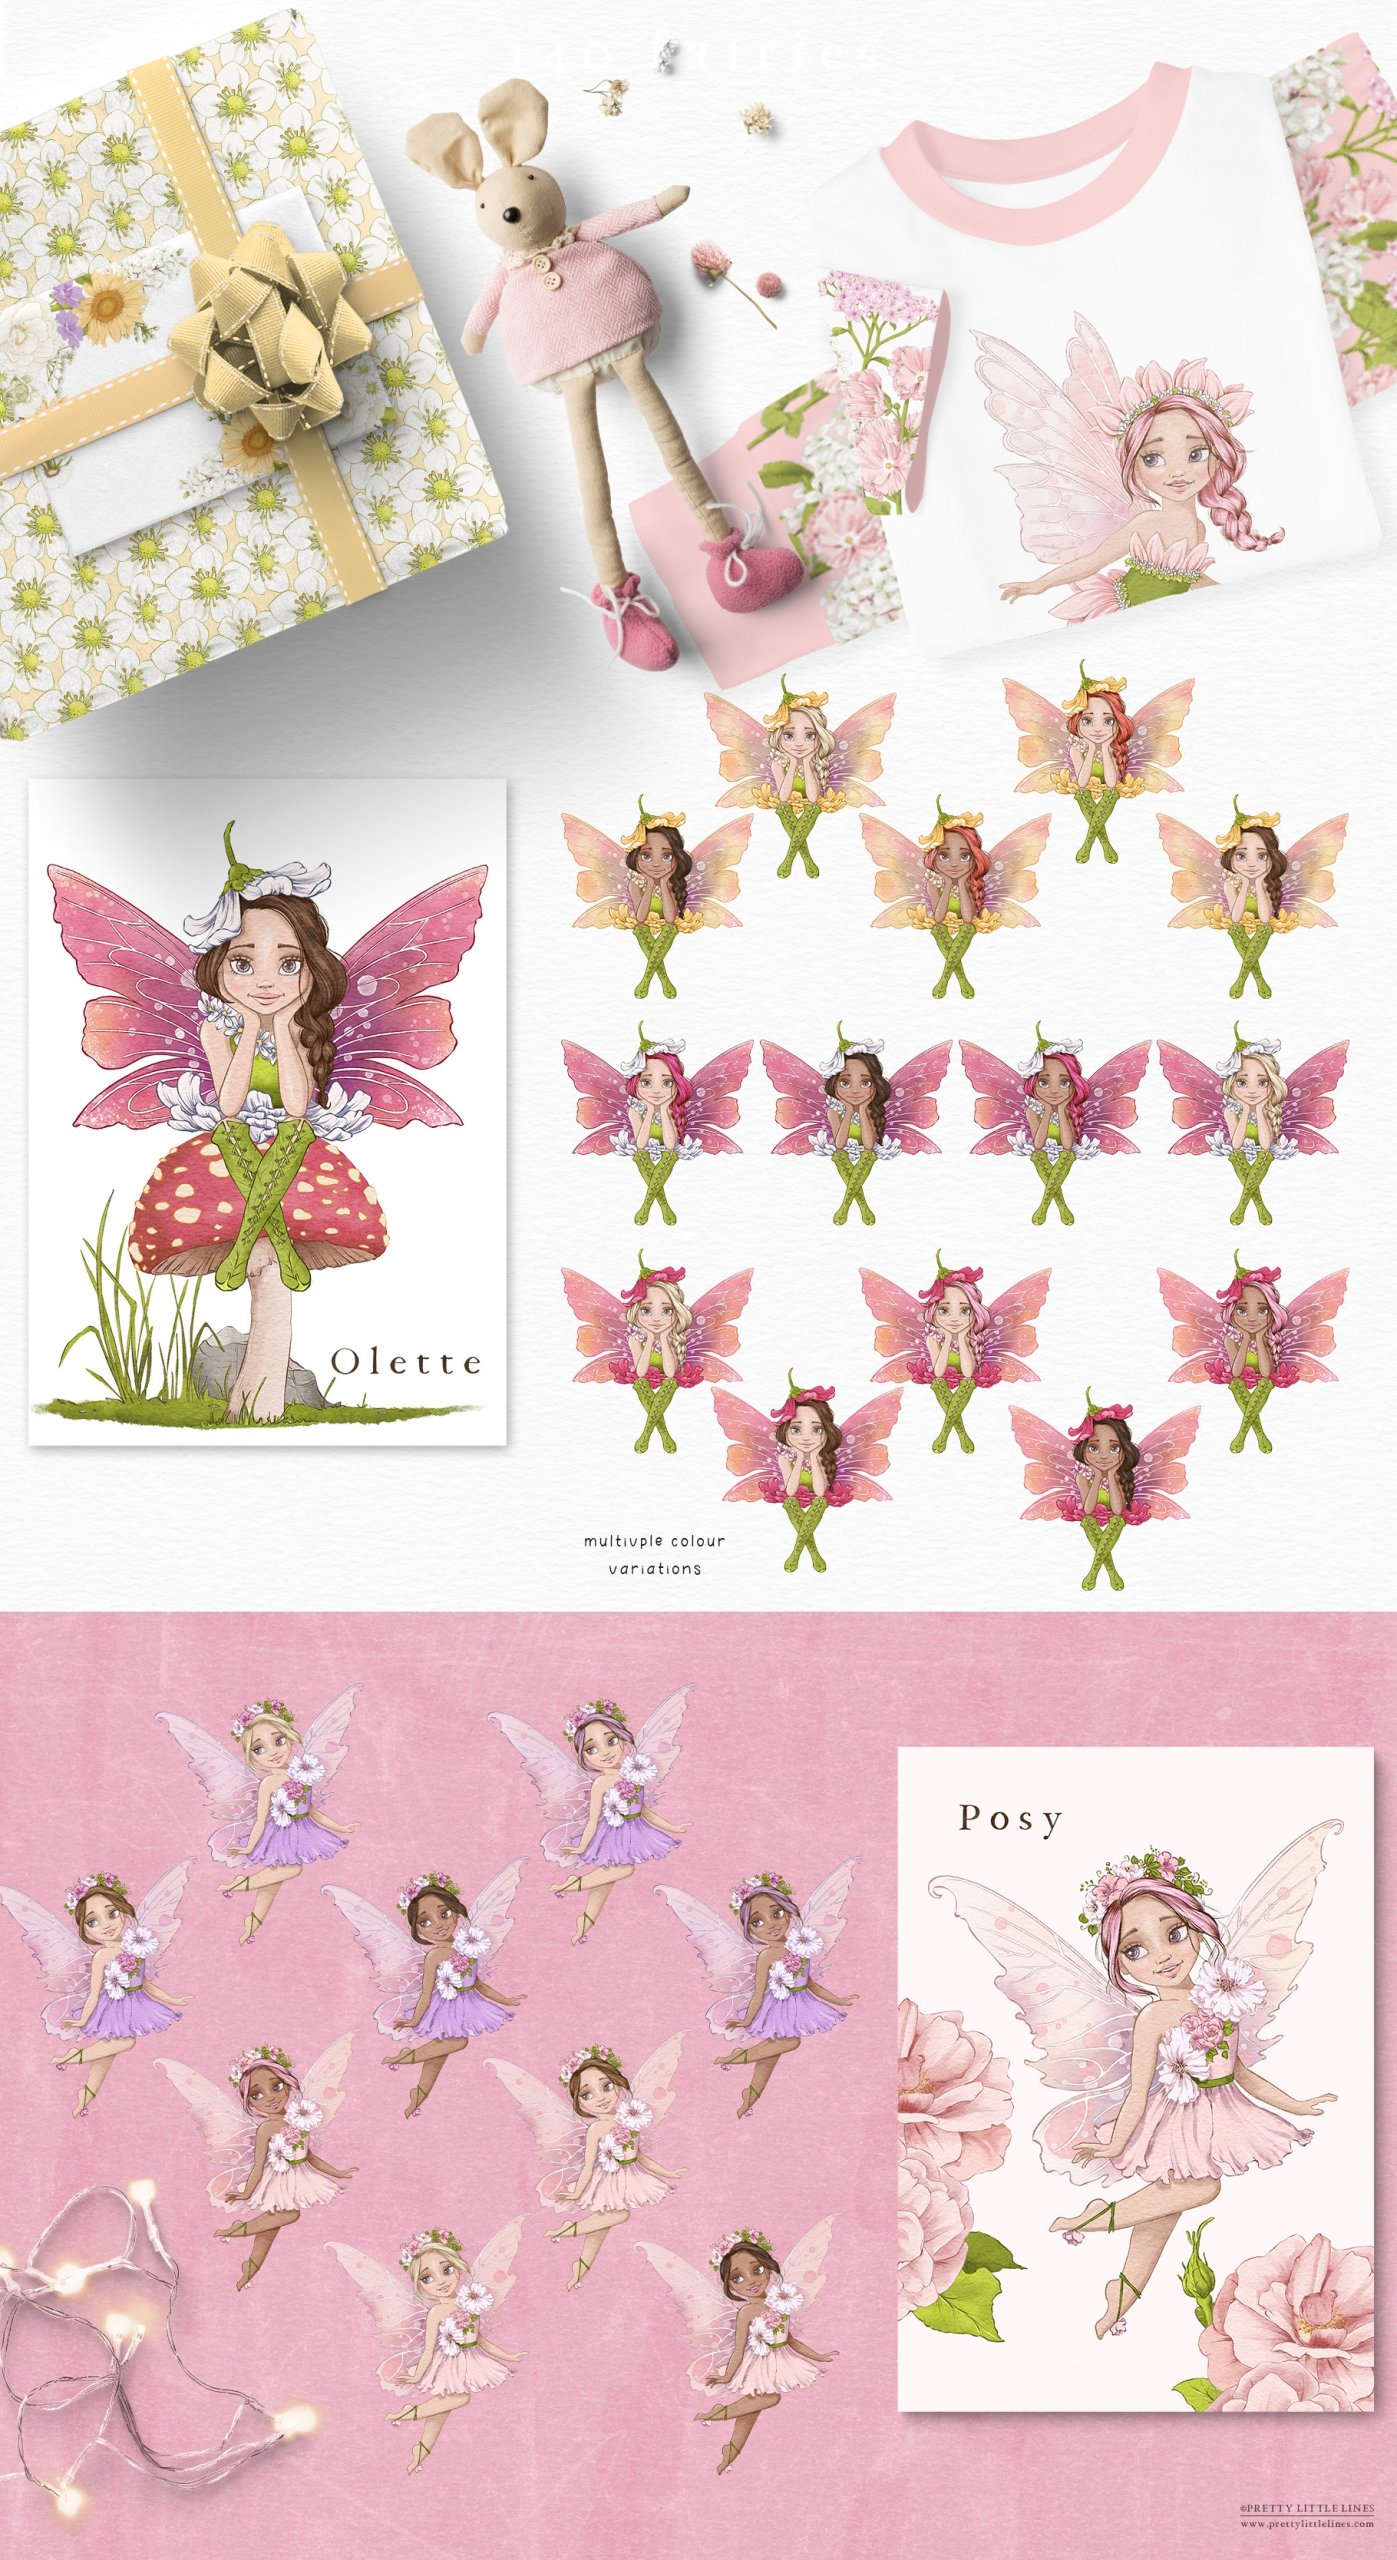 Fairies – A Whimsical Woodland Illustration Collection